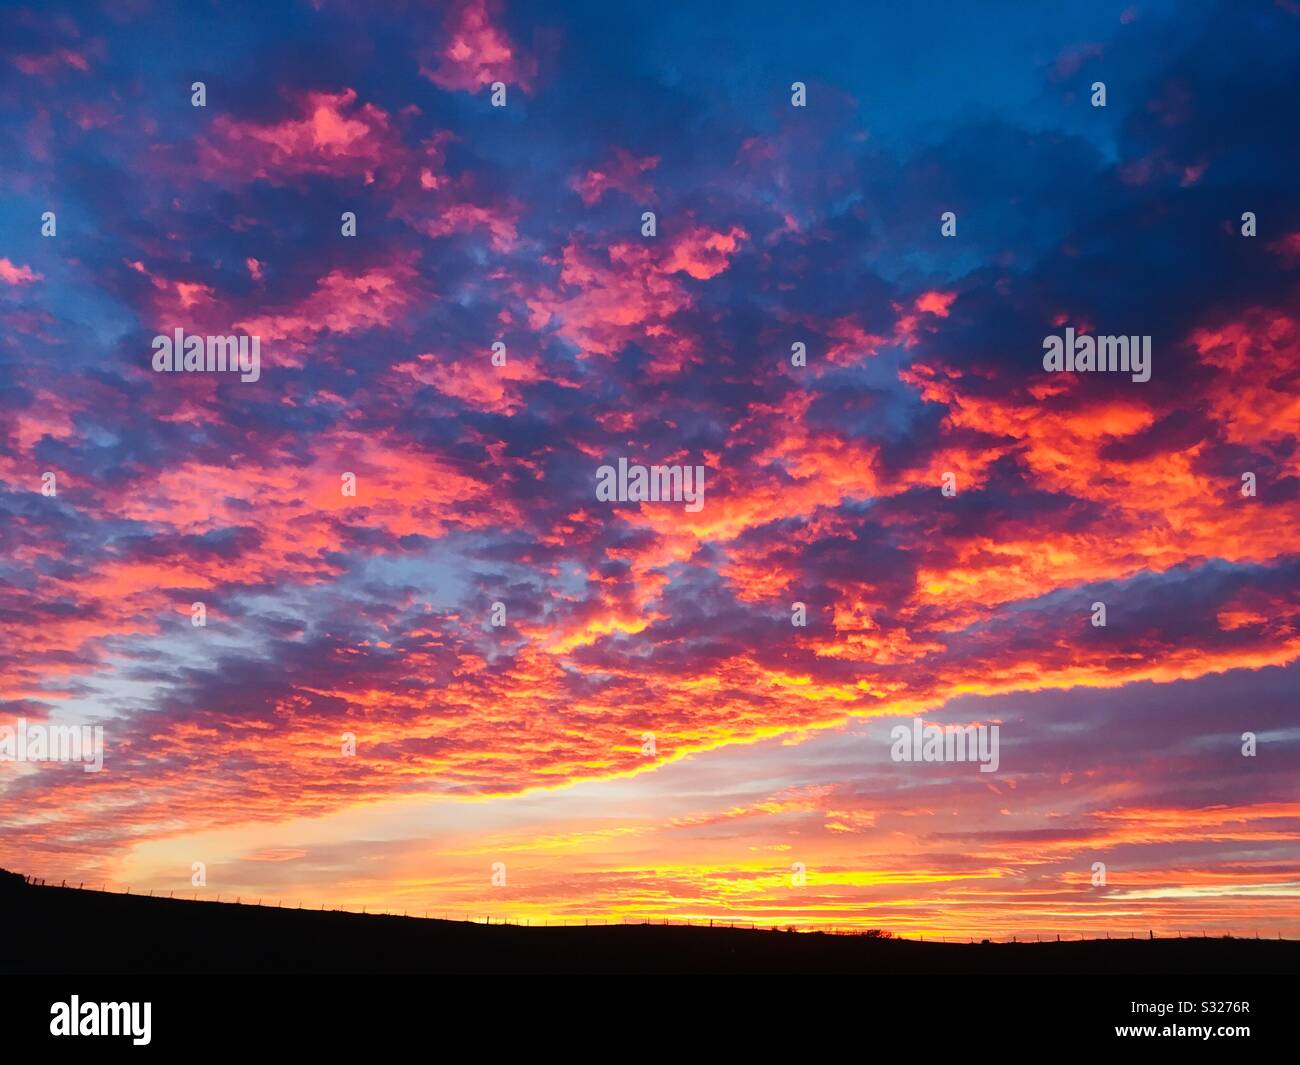 Dramatic Fiery Winter Sunset clouds over the Rhins, Dumfries and Galloway, Scotland Stock Photo